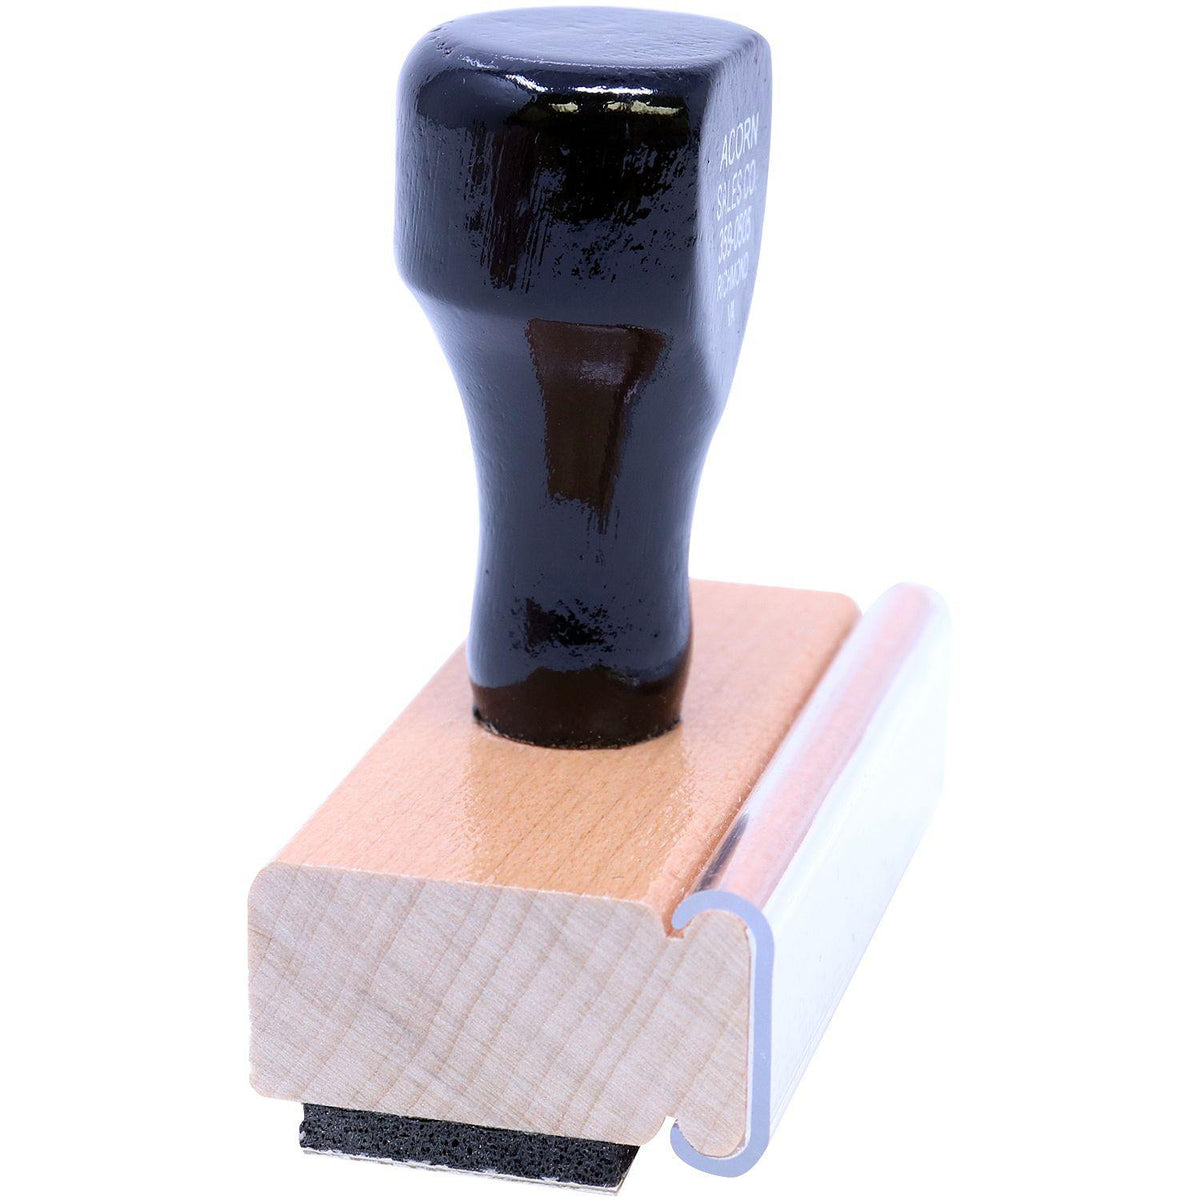 Side View of Large Change Of Address Rubber Stamp at an Angle